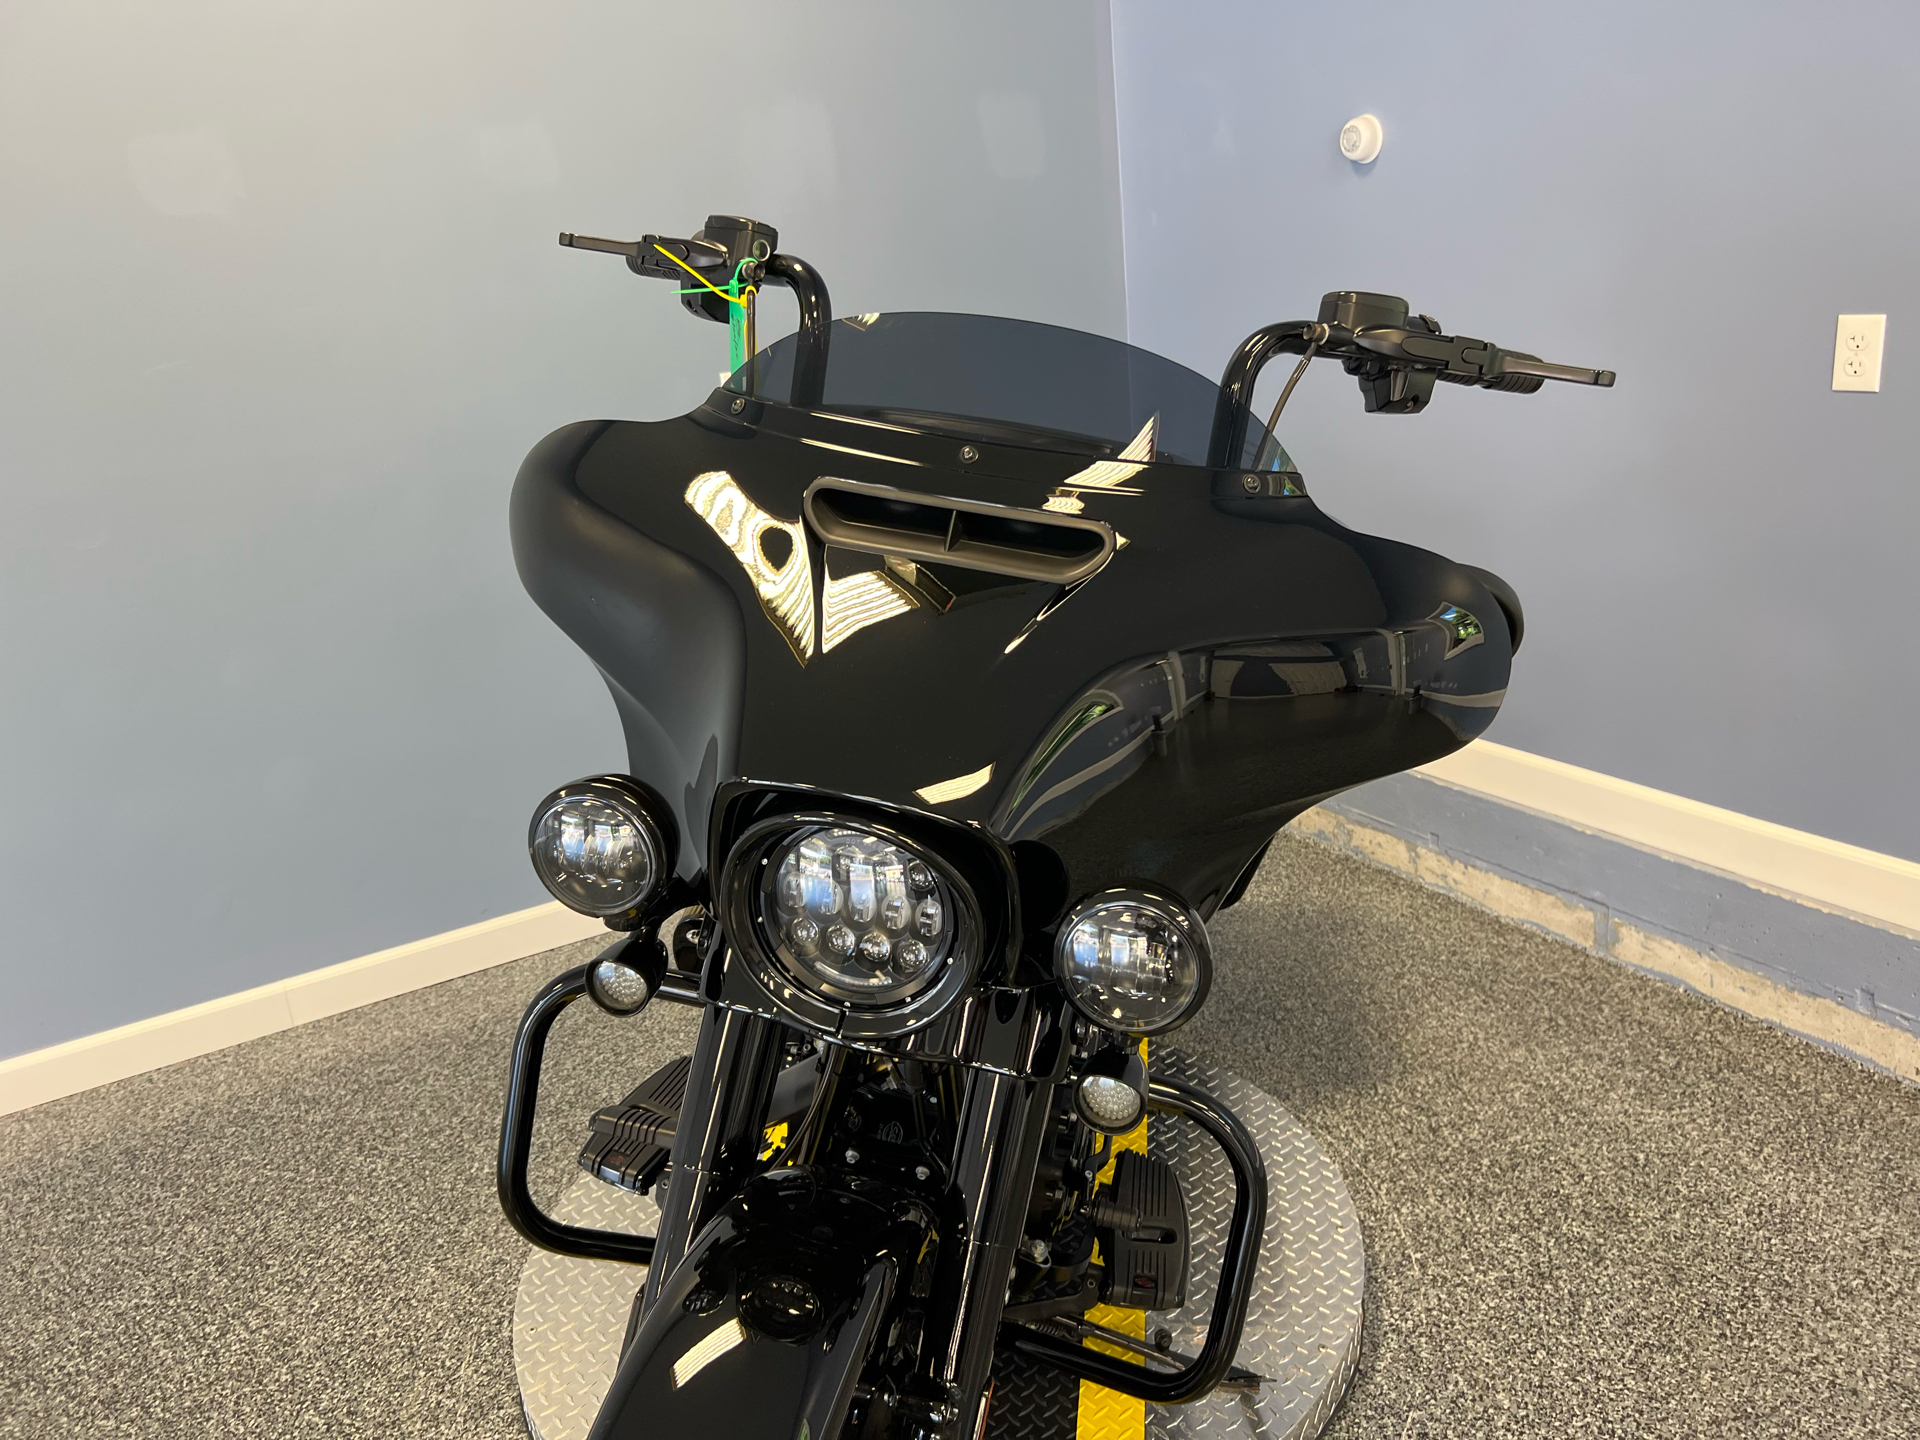 2019 Harley-Davidson Street Glide® Special in Meredith, New Hampshire - Photo 5